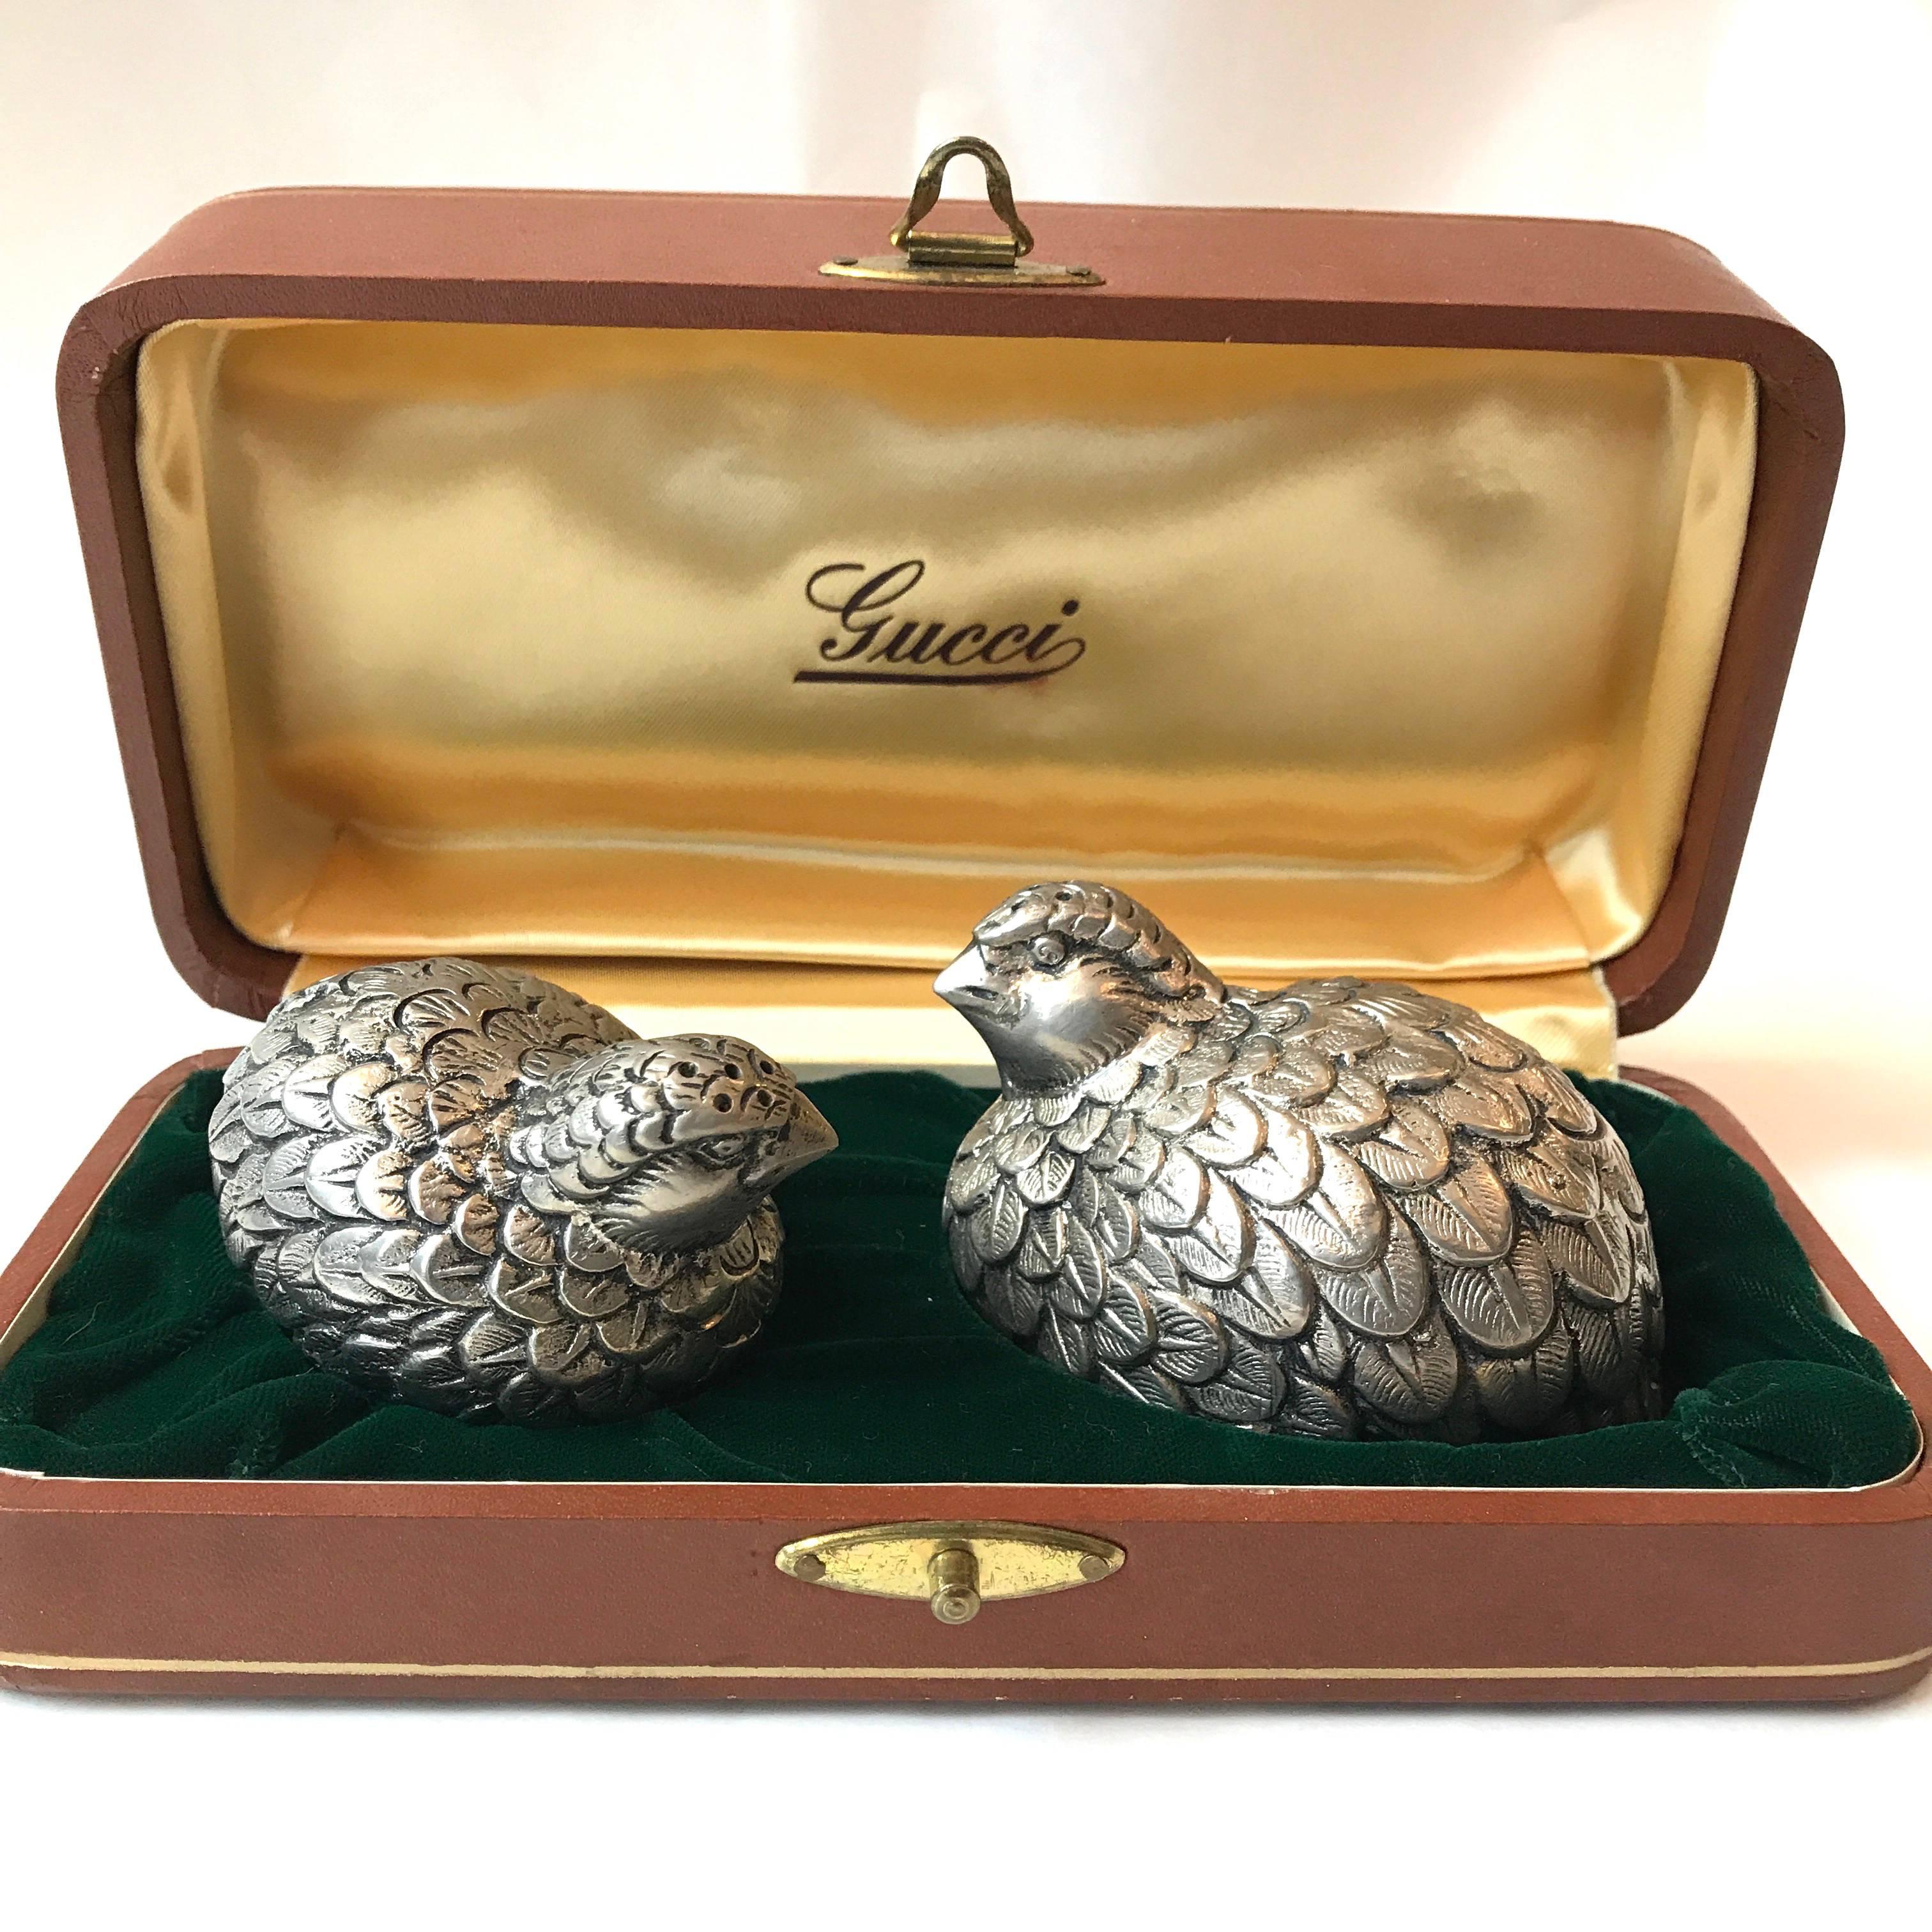 gucci salt and pepper shakers